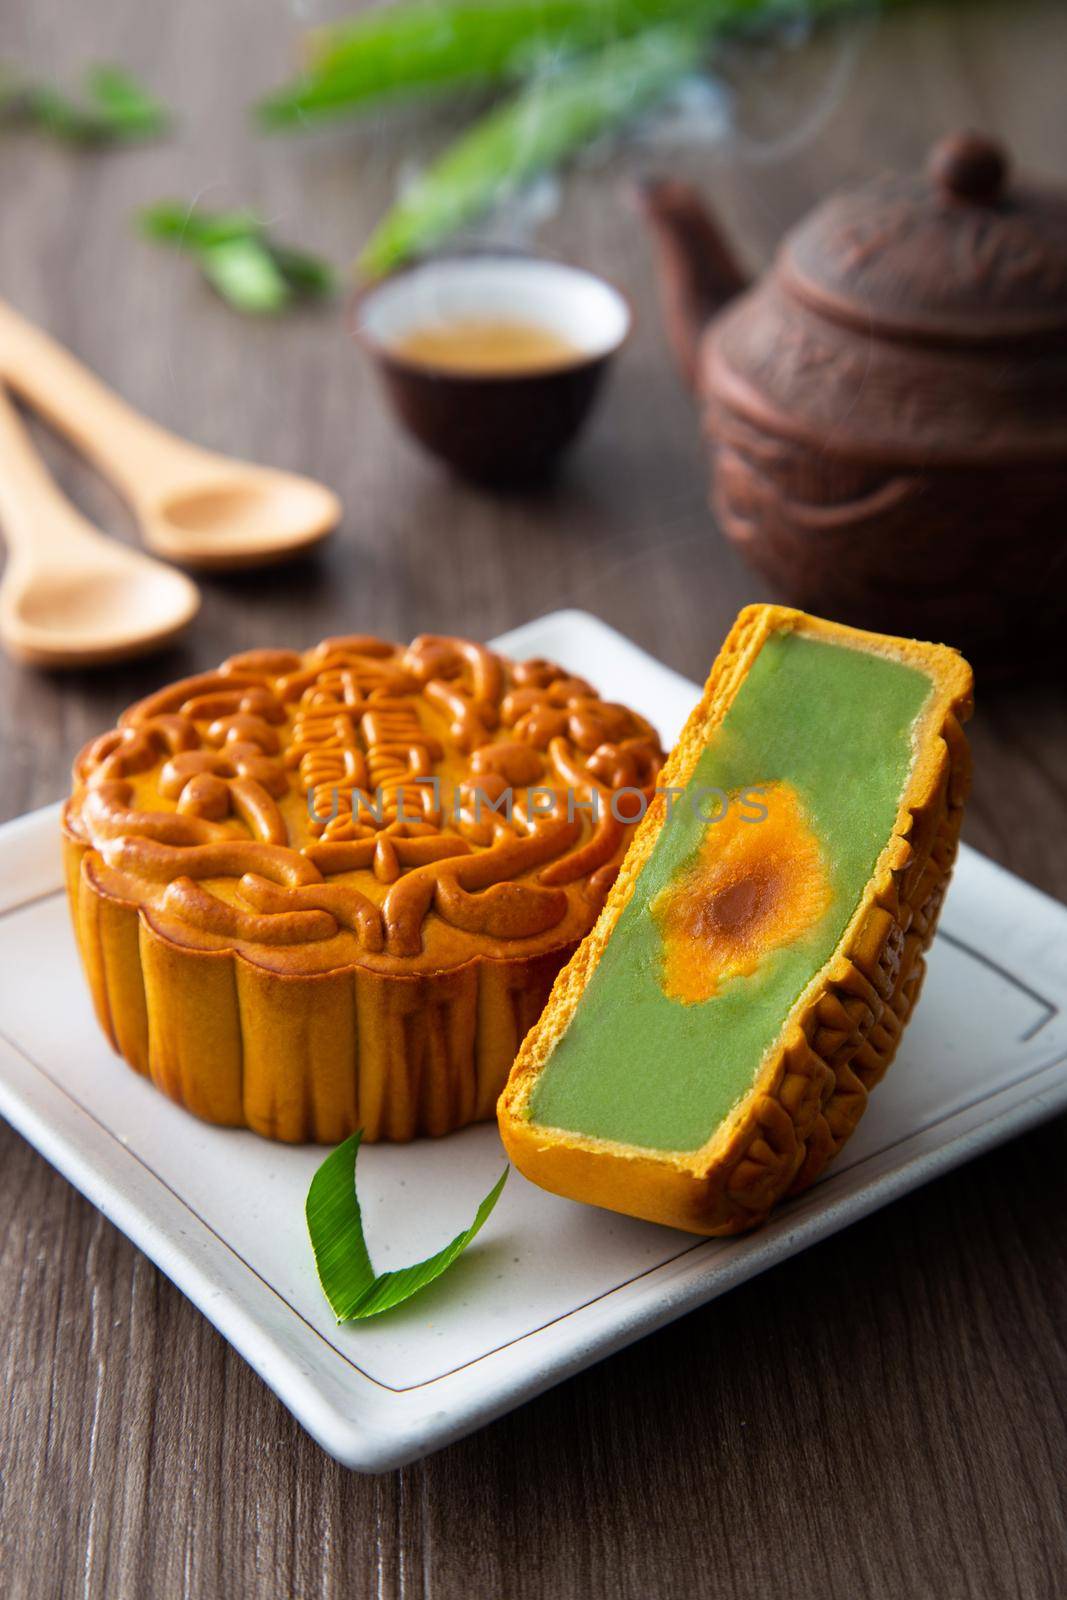 Moon cakes with Chinese tea. by tehcheesiong